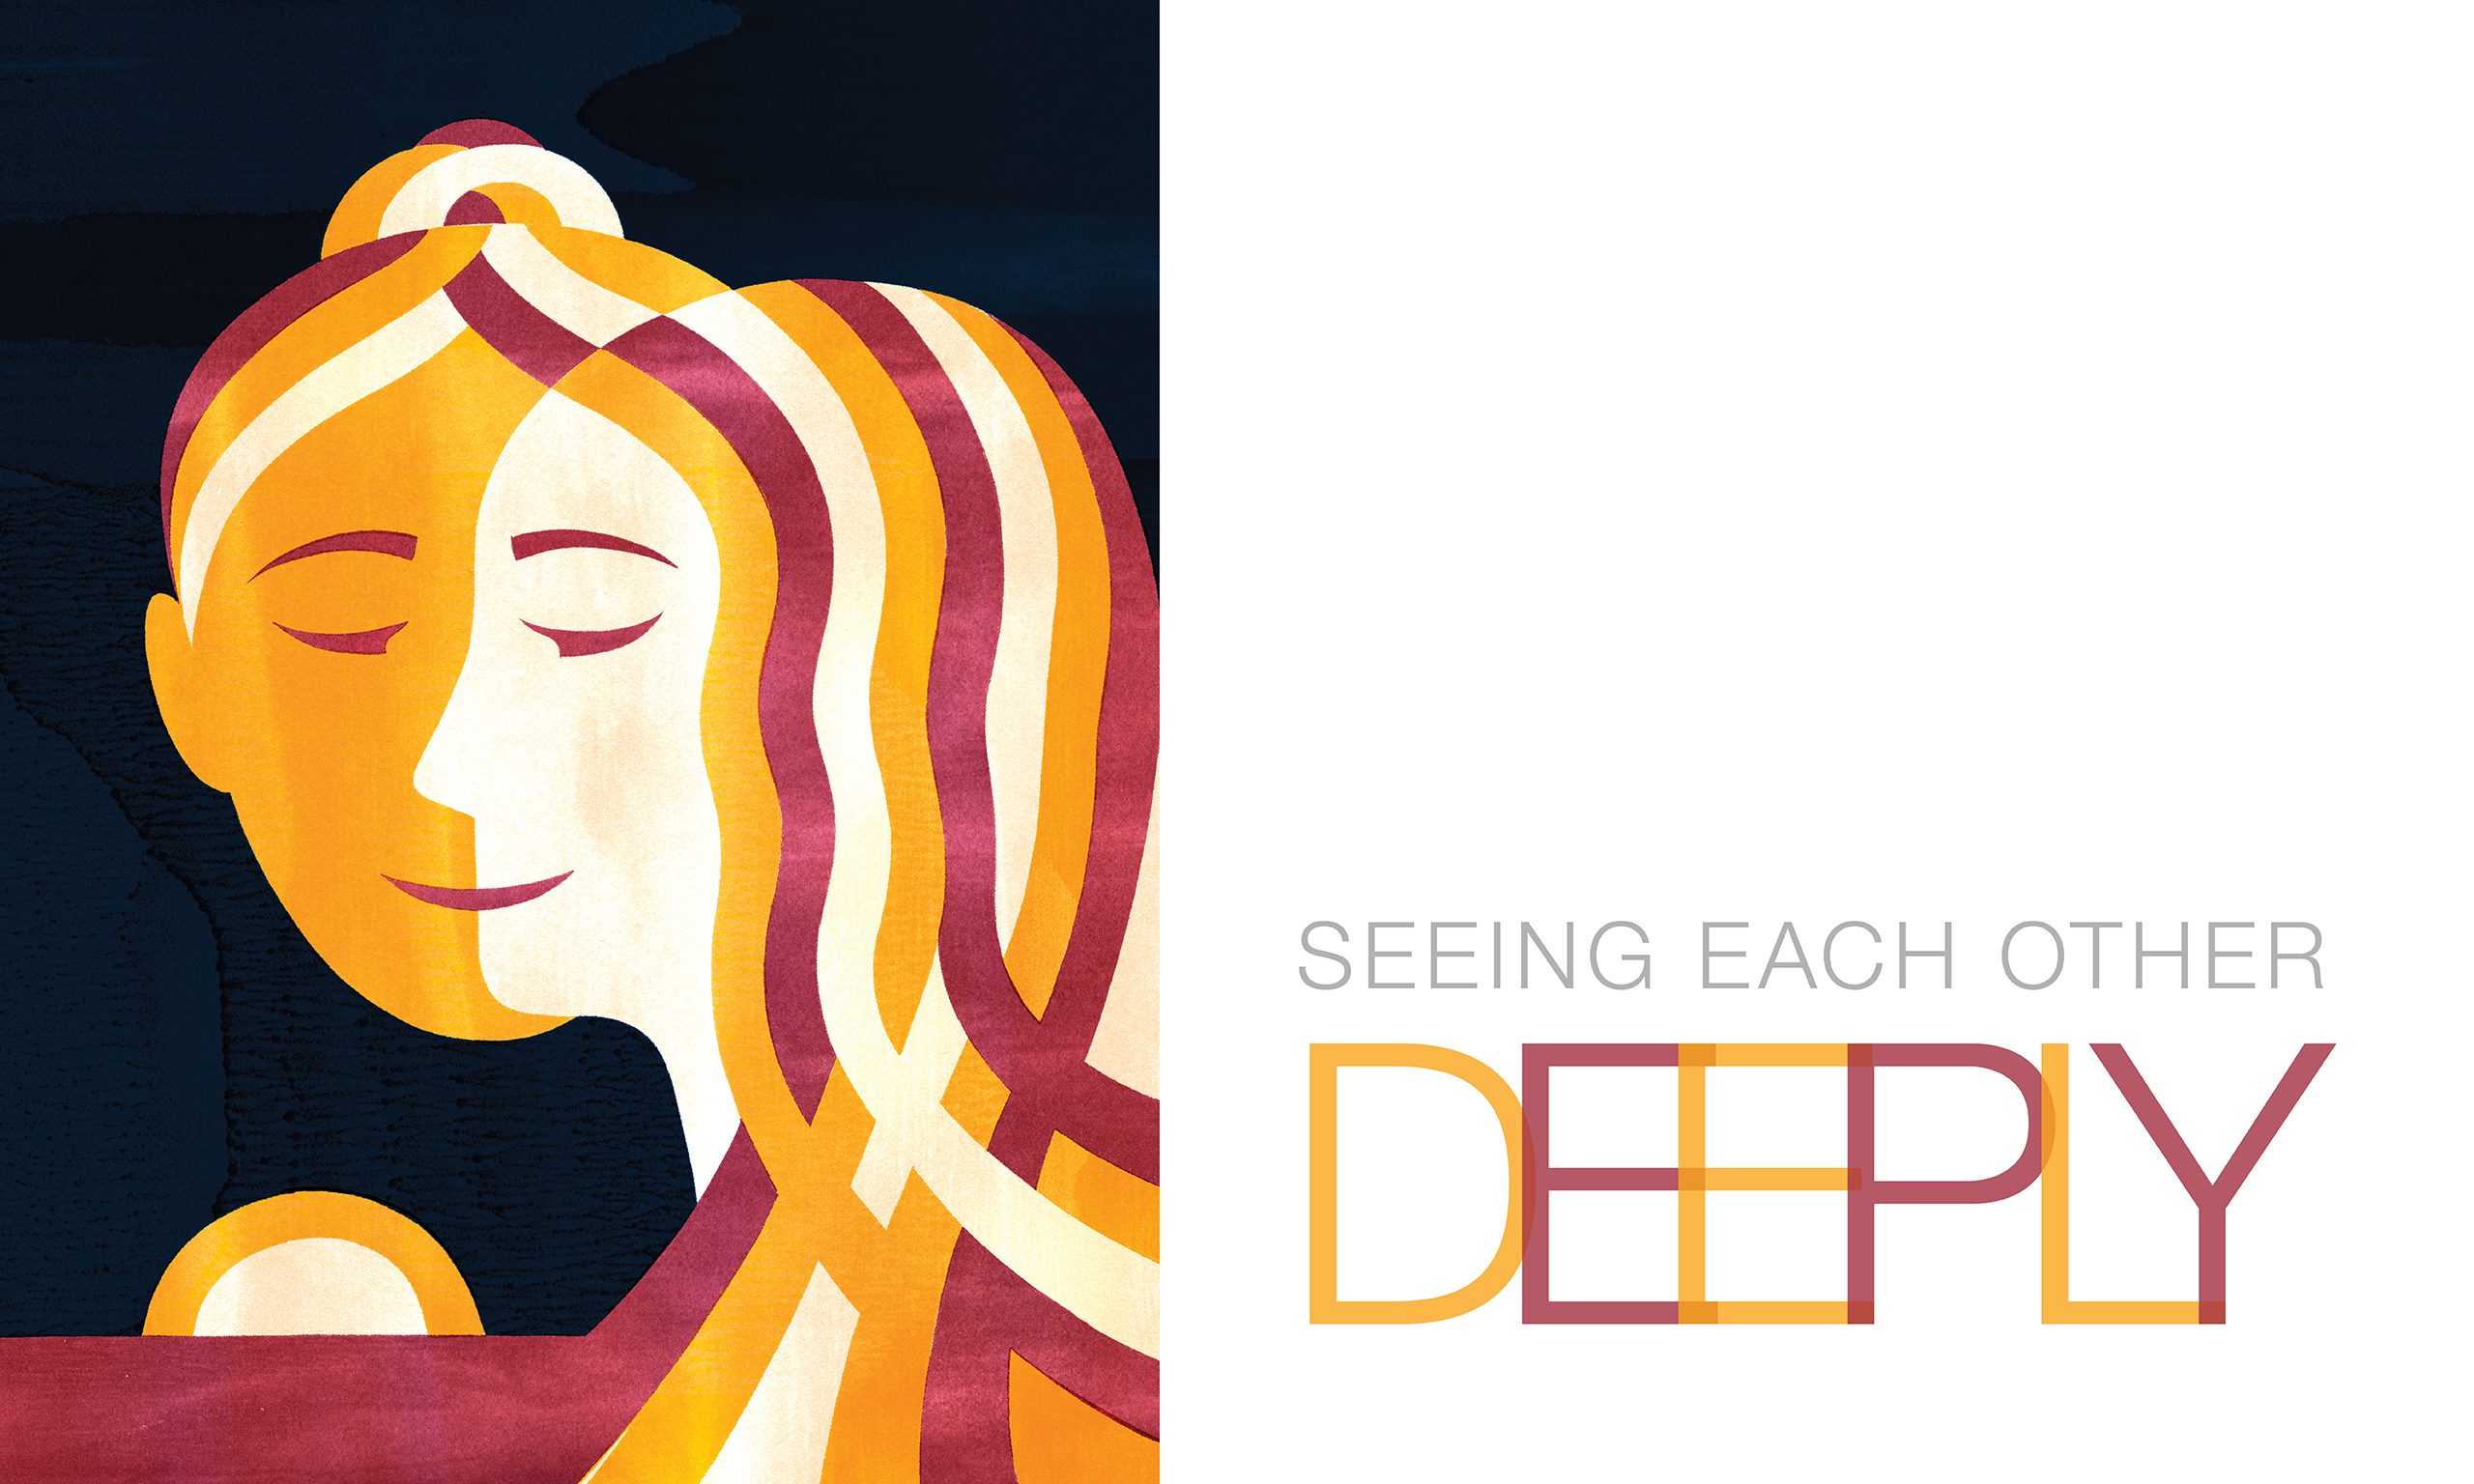 Opening spread of a BYU magazine article titled "Seeing Each Other Deeply," which shows an illustration of two women.